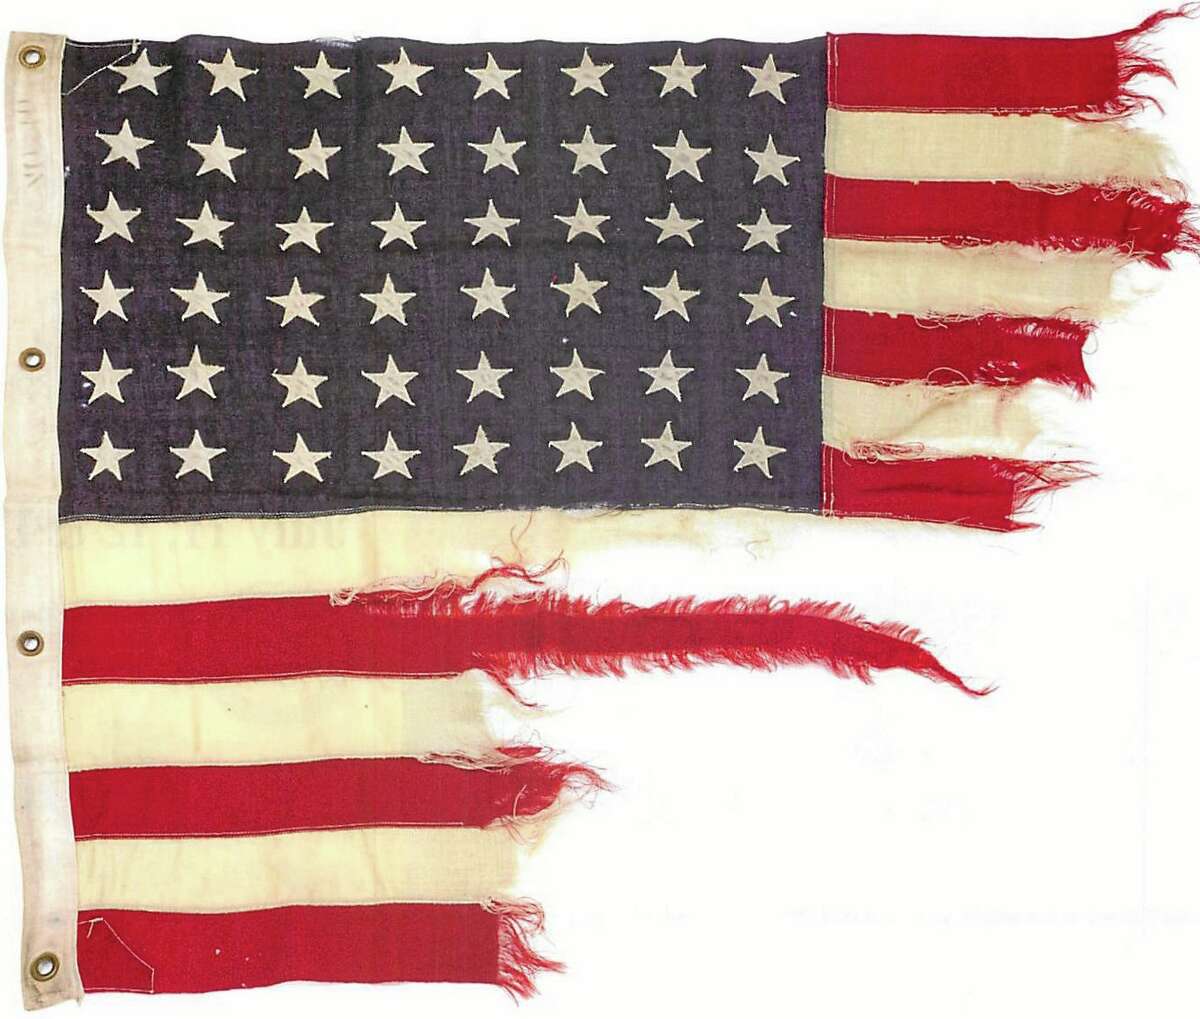 This photo provided by collector Rodney Hilton Brown shows a tattered 48-star American flag that flew aboard the U.S.-built LST 493 on D-Day that is being auctioned by Bonhams in New York on Thursday, June 5, 2014. The flag is among the hundreds of D-Day and other World War II artifacts being auctioned a day before the 70th anniversary of the history-changing invasion. The auction also features rare print-outs of the original series of hourly Dow Jones news bulletins with some of the first reports of the fighting on Franceís north coast on June 6, 1944. (AP Photo/Courtesy of Rodney Hilton Brown)